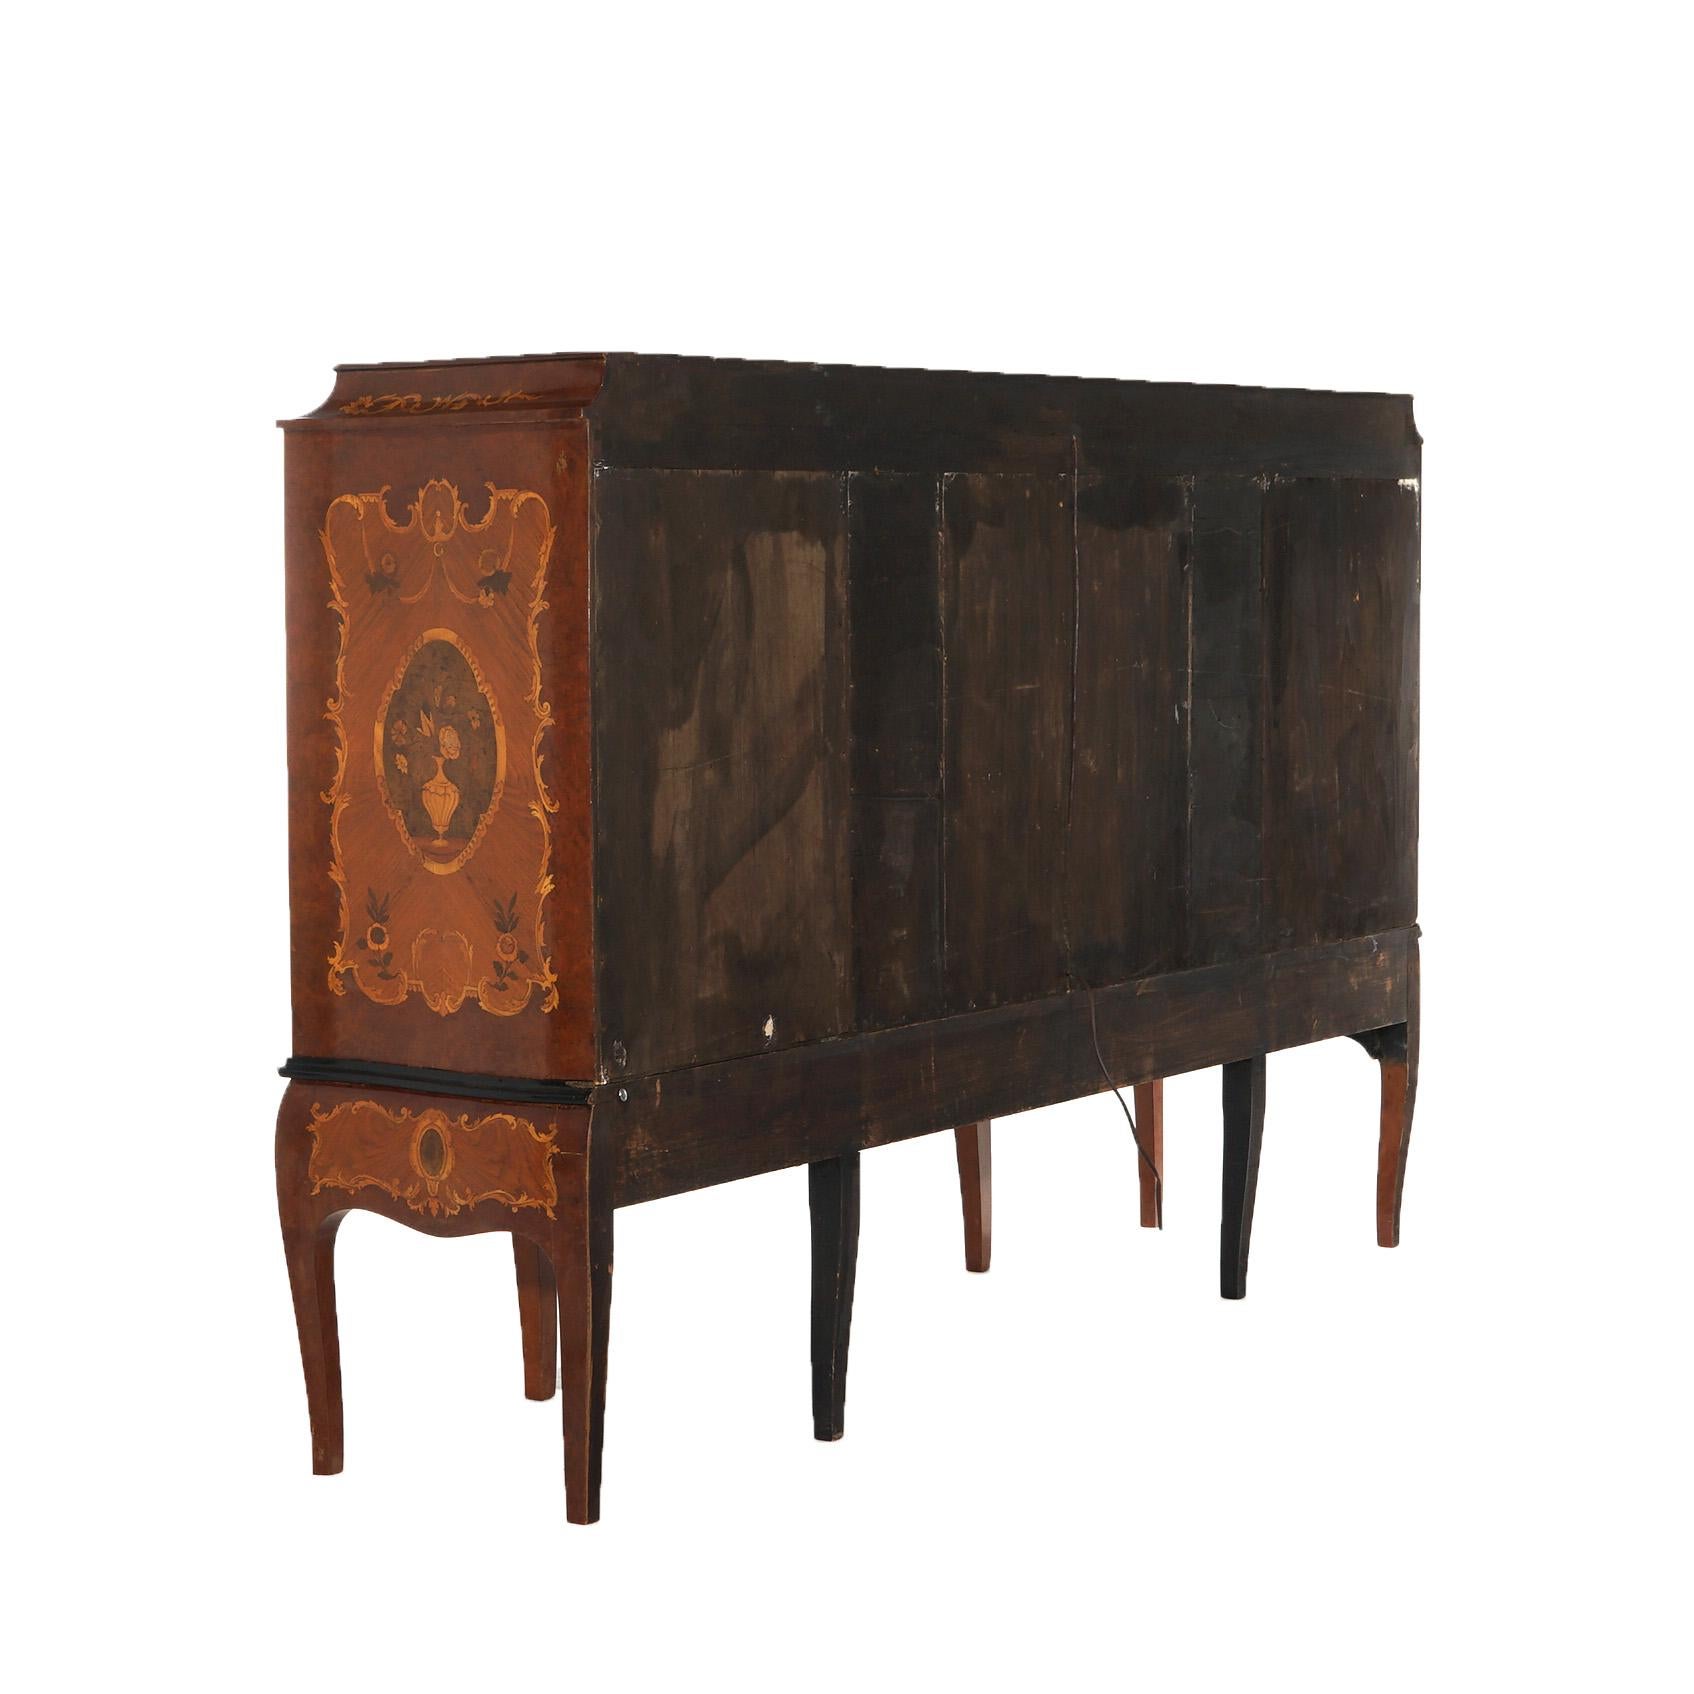 Antique French Kingwood Satinwood & Burlwood Marquetry Inlaid Sideboard C1930 For Sale 5